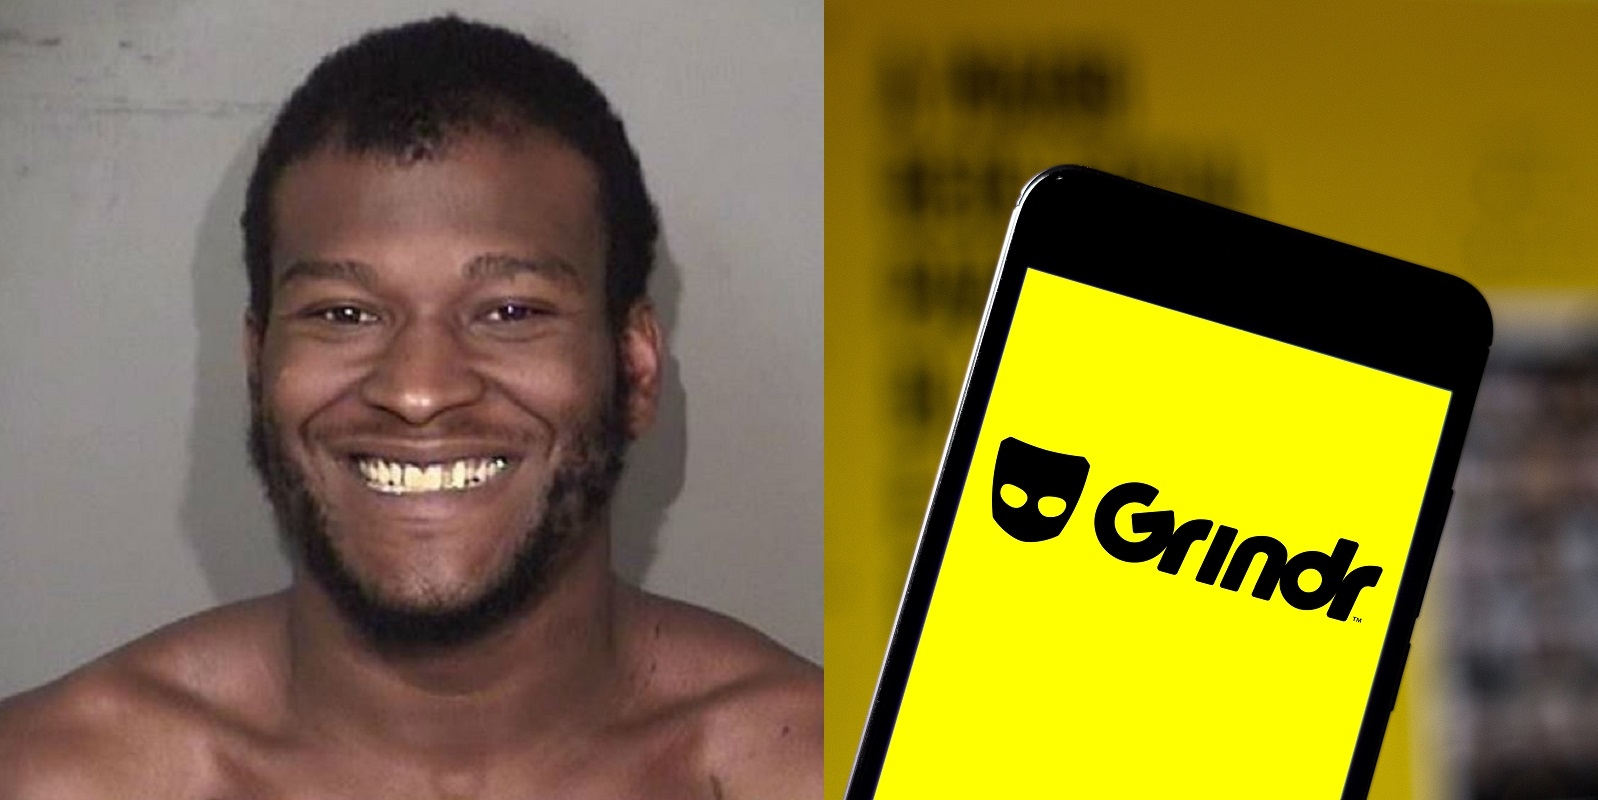 Man allegedly used app to find gay people, shoot them dead